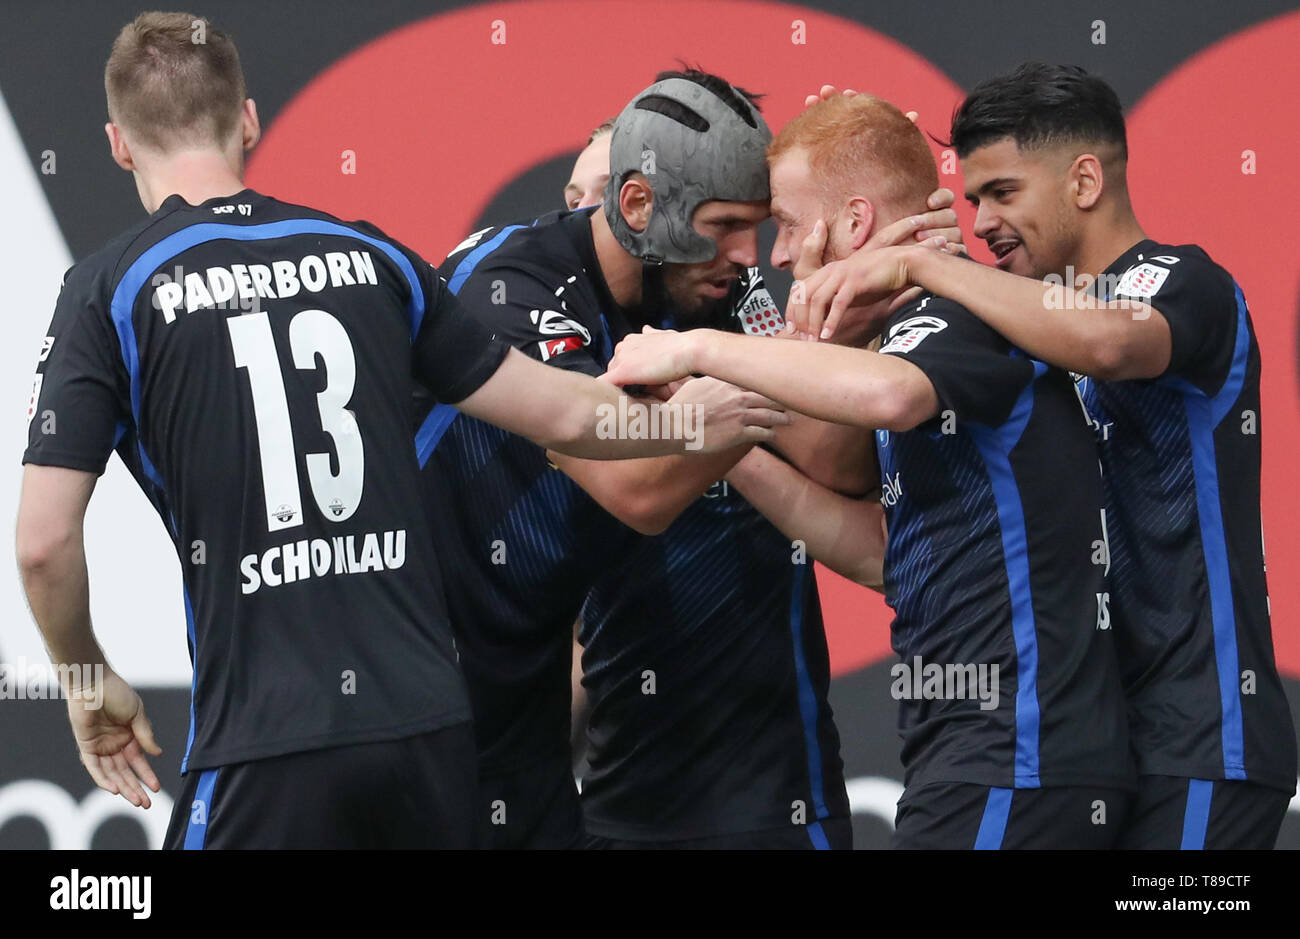 Paderborn, Germany. 12th May, 2019. Soccer: 2nd Bundesliga, SC Paderborn 07 - Hamburger SV, 33rd matchday in the Benteler Arena. Paderborn's scorer Sebastian Vasiliadis (2nd from right) celebrates his 2-0 goal with Sebastian Schonlau (l-r), Klaus Gjasula and Mohamed Dräger. Credit: Friso Gentsch/dpa - IMPORTANT NOTE: In accordance with the requirements of the DFL Deutsche Fußball Liga or the DFB Deutscher Fußball-Bund, it is prohibited to use or have used photographs taken in the stadium and/or the match in the form of sequence images and/or video-like photo sequences./dpa/Alamy Live News Stock Photo